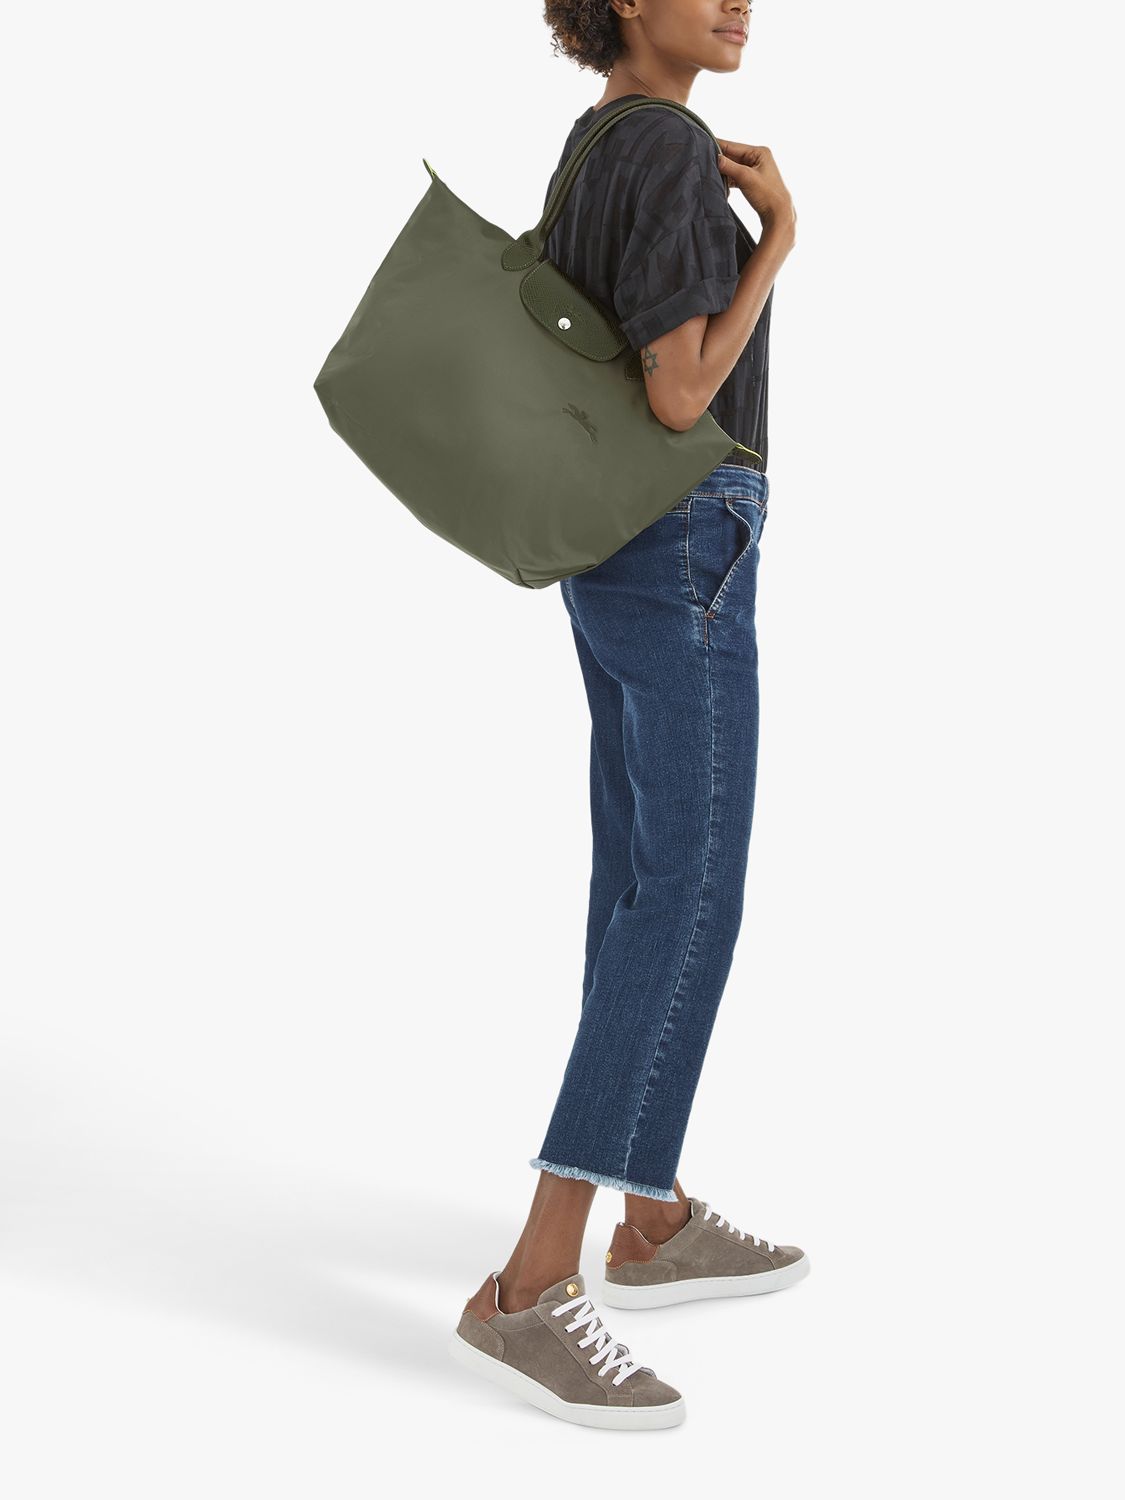 Longchamp Le Pliage Green Recycled Canvas Large Shoulder Tote